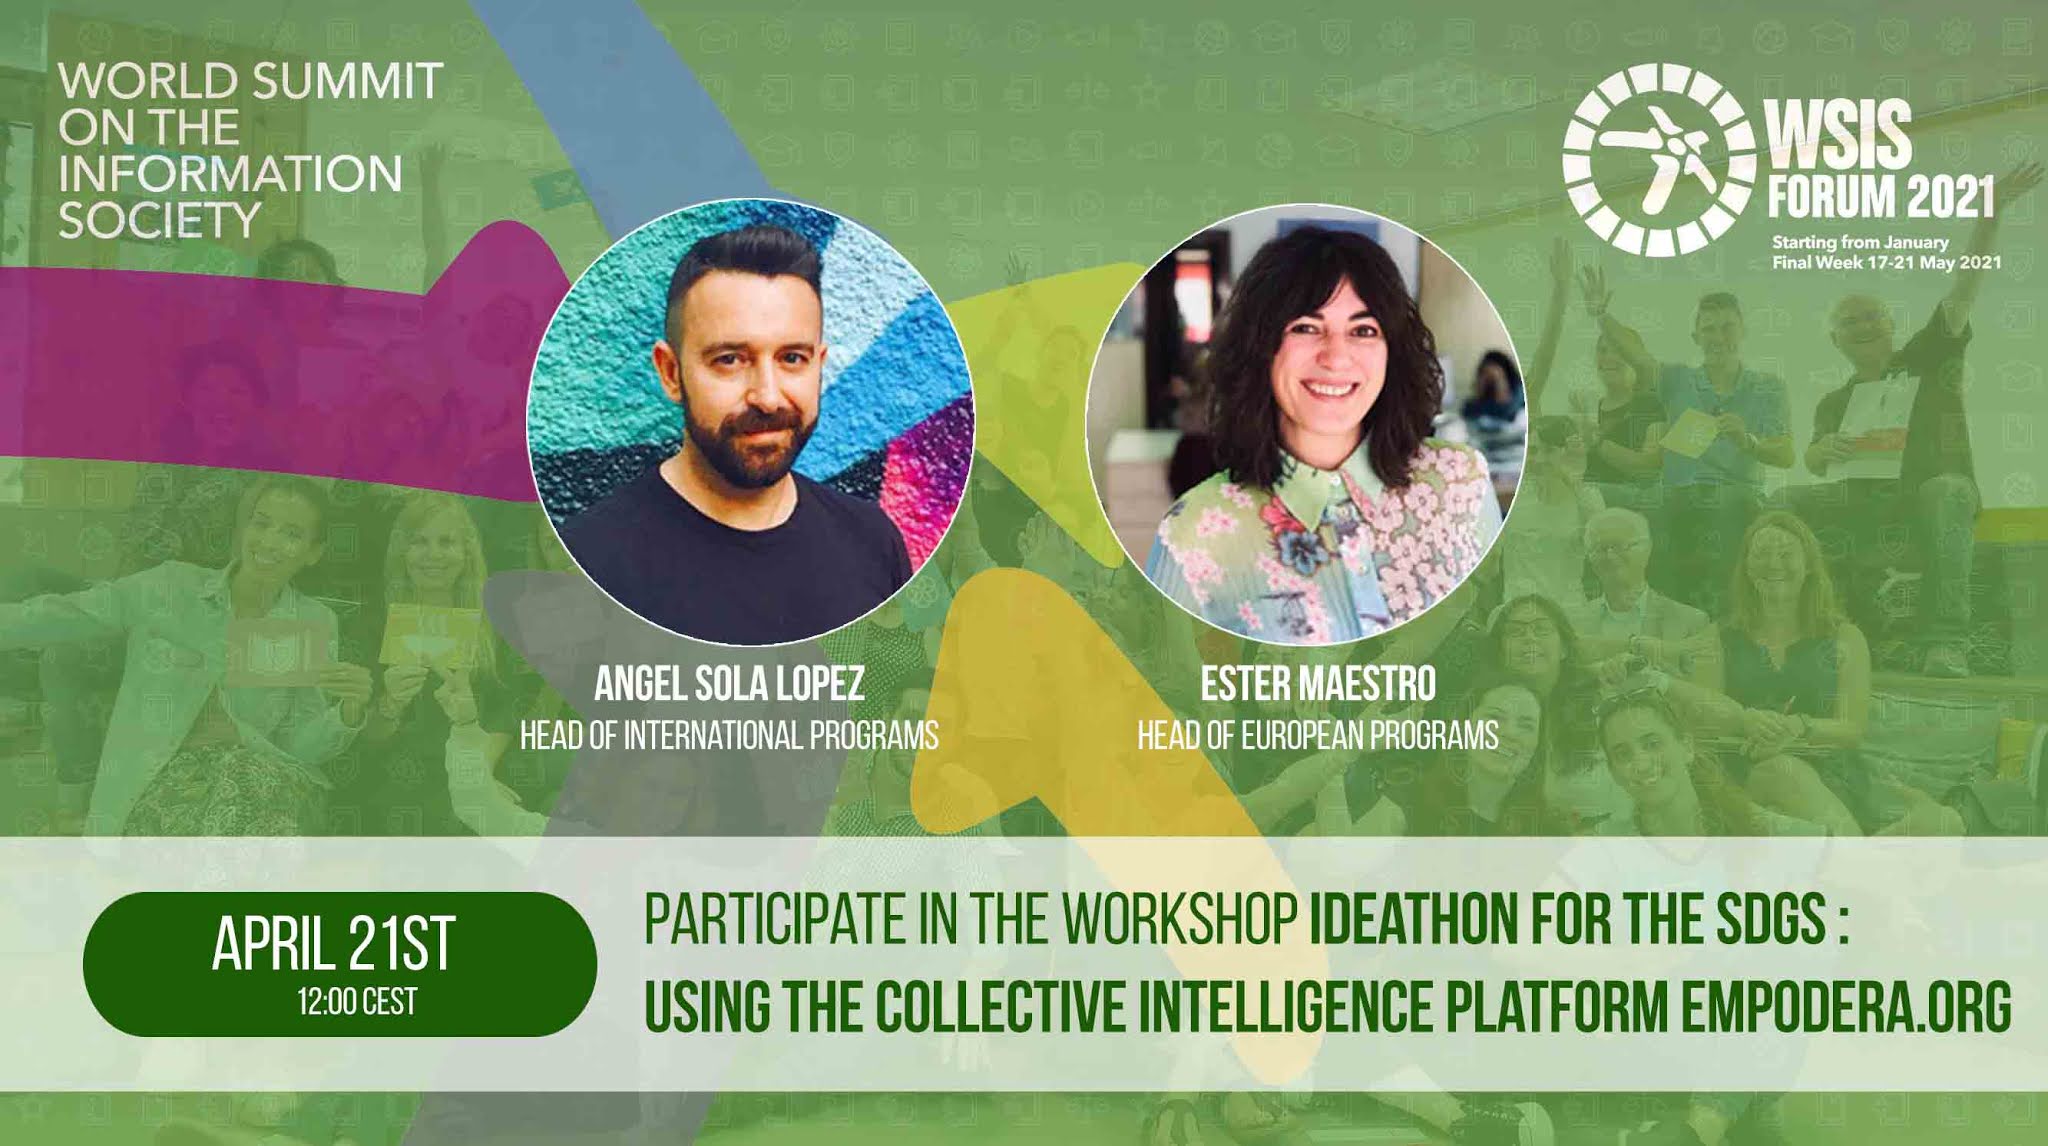 Ideathon for the SDGs in WSIS Forum: Using the Collective Intelligence Platform Empodera.org to create collaborative solutions